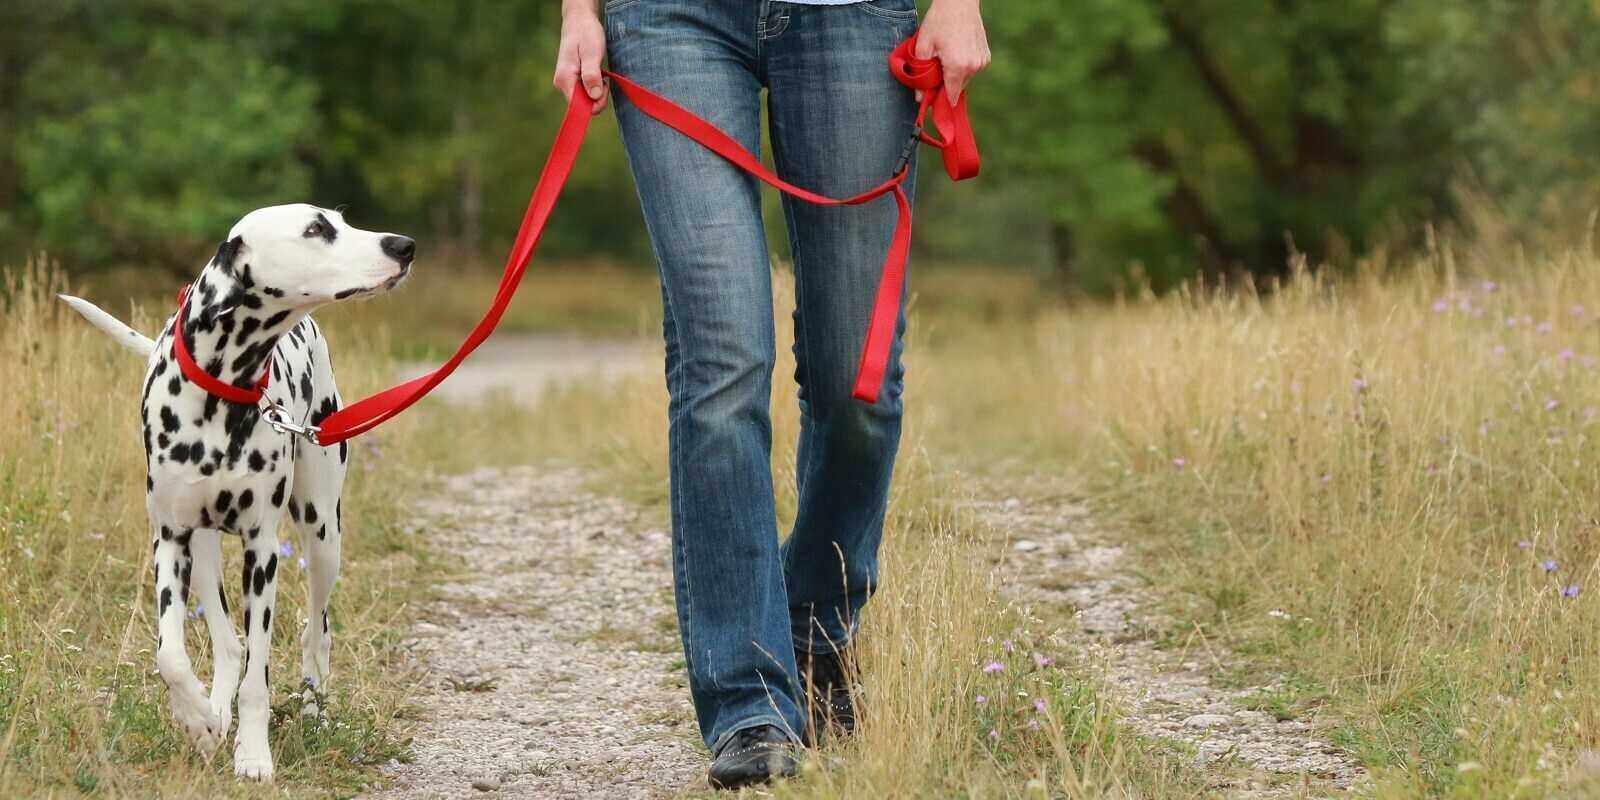 woman is walking a dalmatian dog on a leash in nature environment